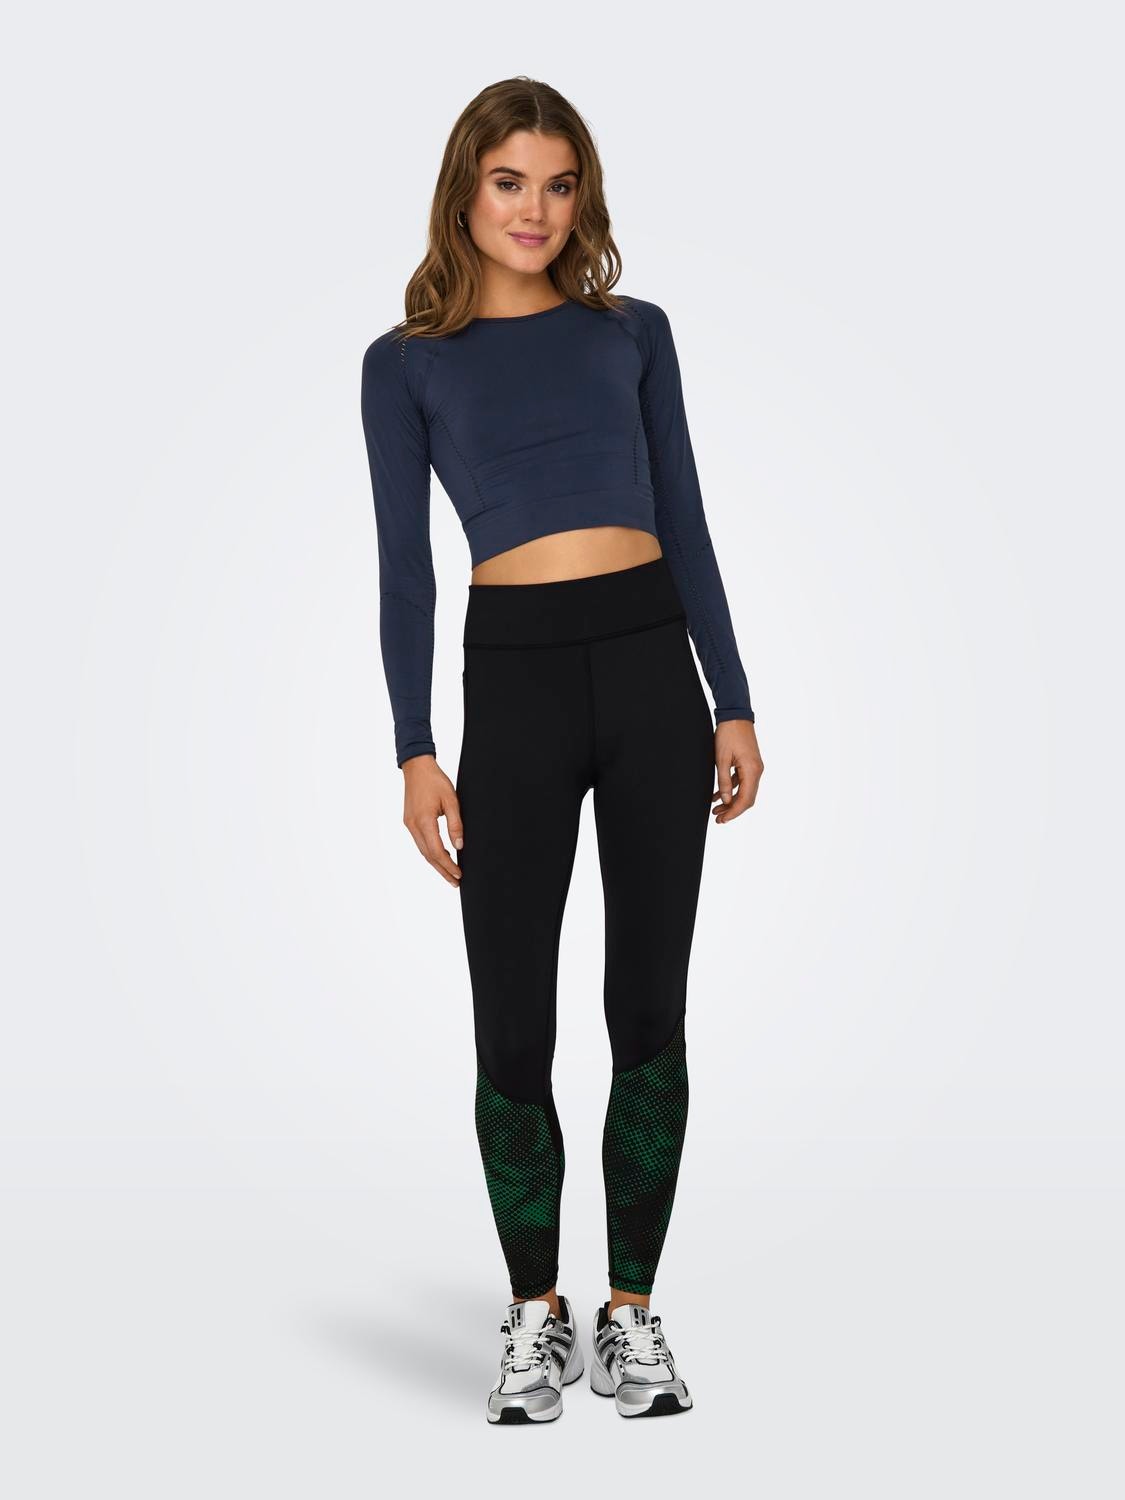 ONLY Tight Fit High waist Leggings -Black - 15306074